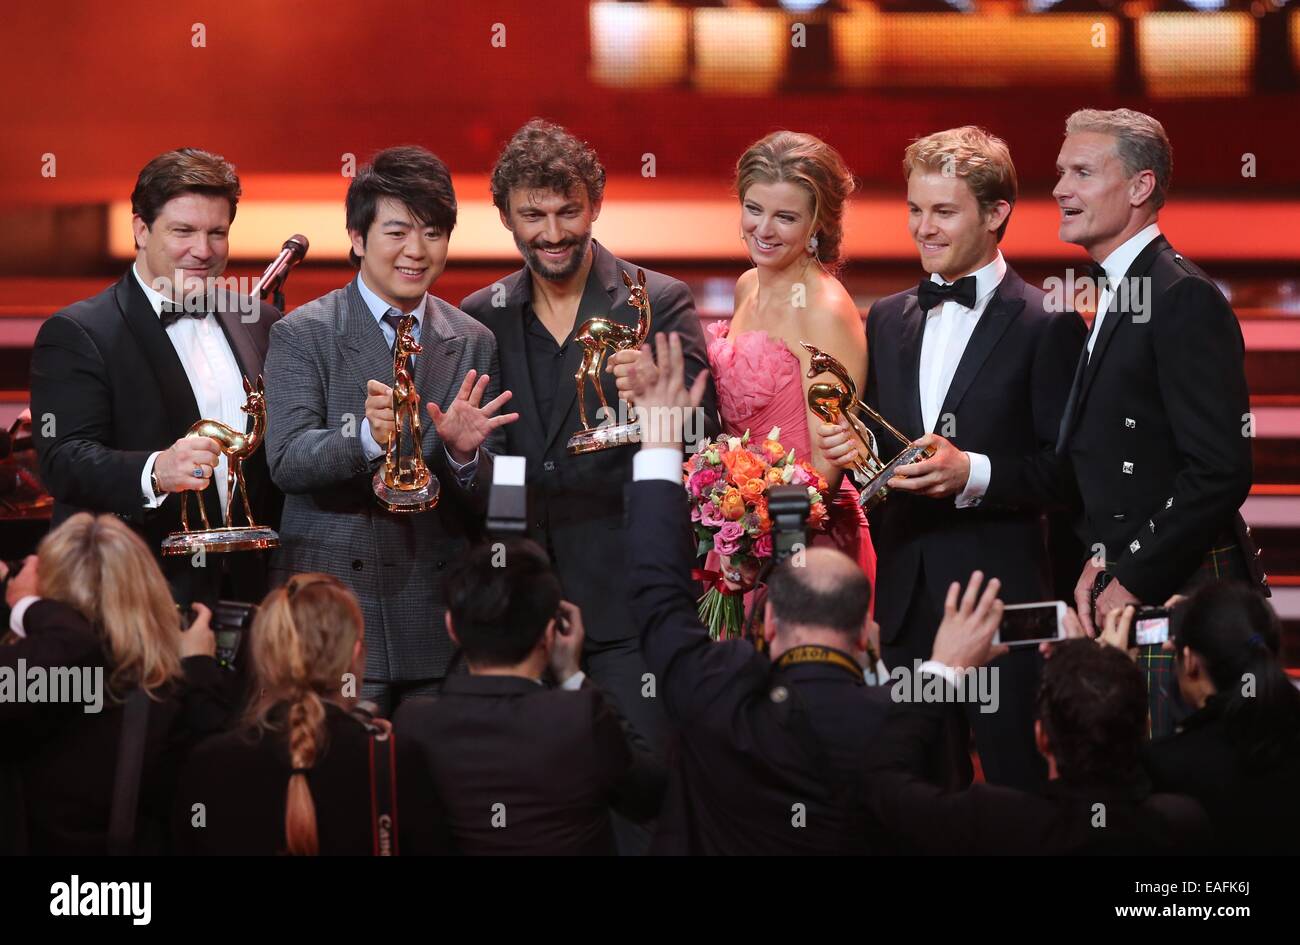 Berlin, Germany. 13th Nov, 2014. The awardees (L-R) Francis Fulton-Smith, Lang Lang, Jonas Kaufmann, eulogist Nina Eichinger, awardee Nico Rosberg and eulogist David Coulthard pose on stage after the Bambi Award ceremony at the Stage Theater on Potsdamer Platz in Berlin, Germany, 13 November 2014. The gala for the 66th Bambi Awards hosted by Hubert Burda Media took place on 13 November 2014. Photo: Wolfgang Kumm/dpa/Alamy Live News Stock Photo